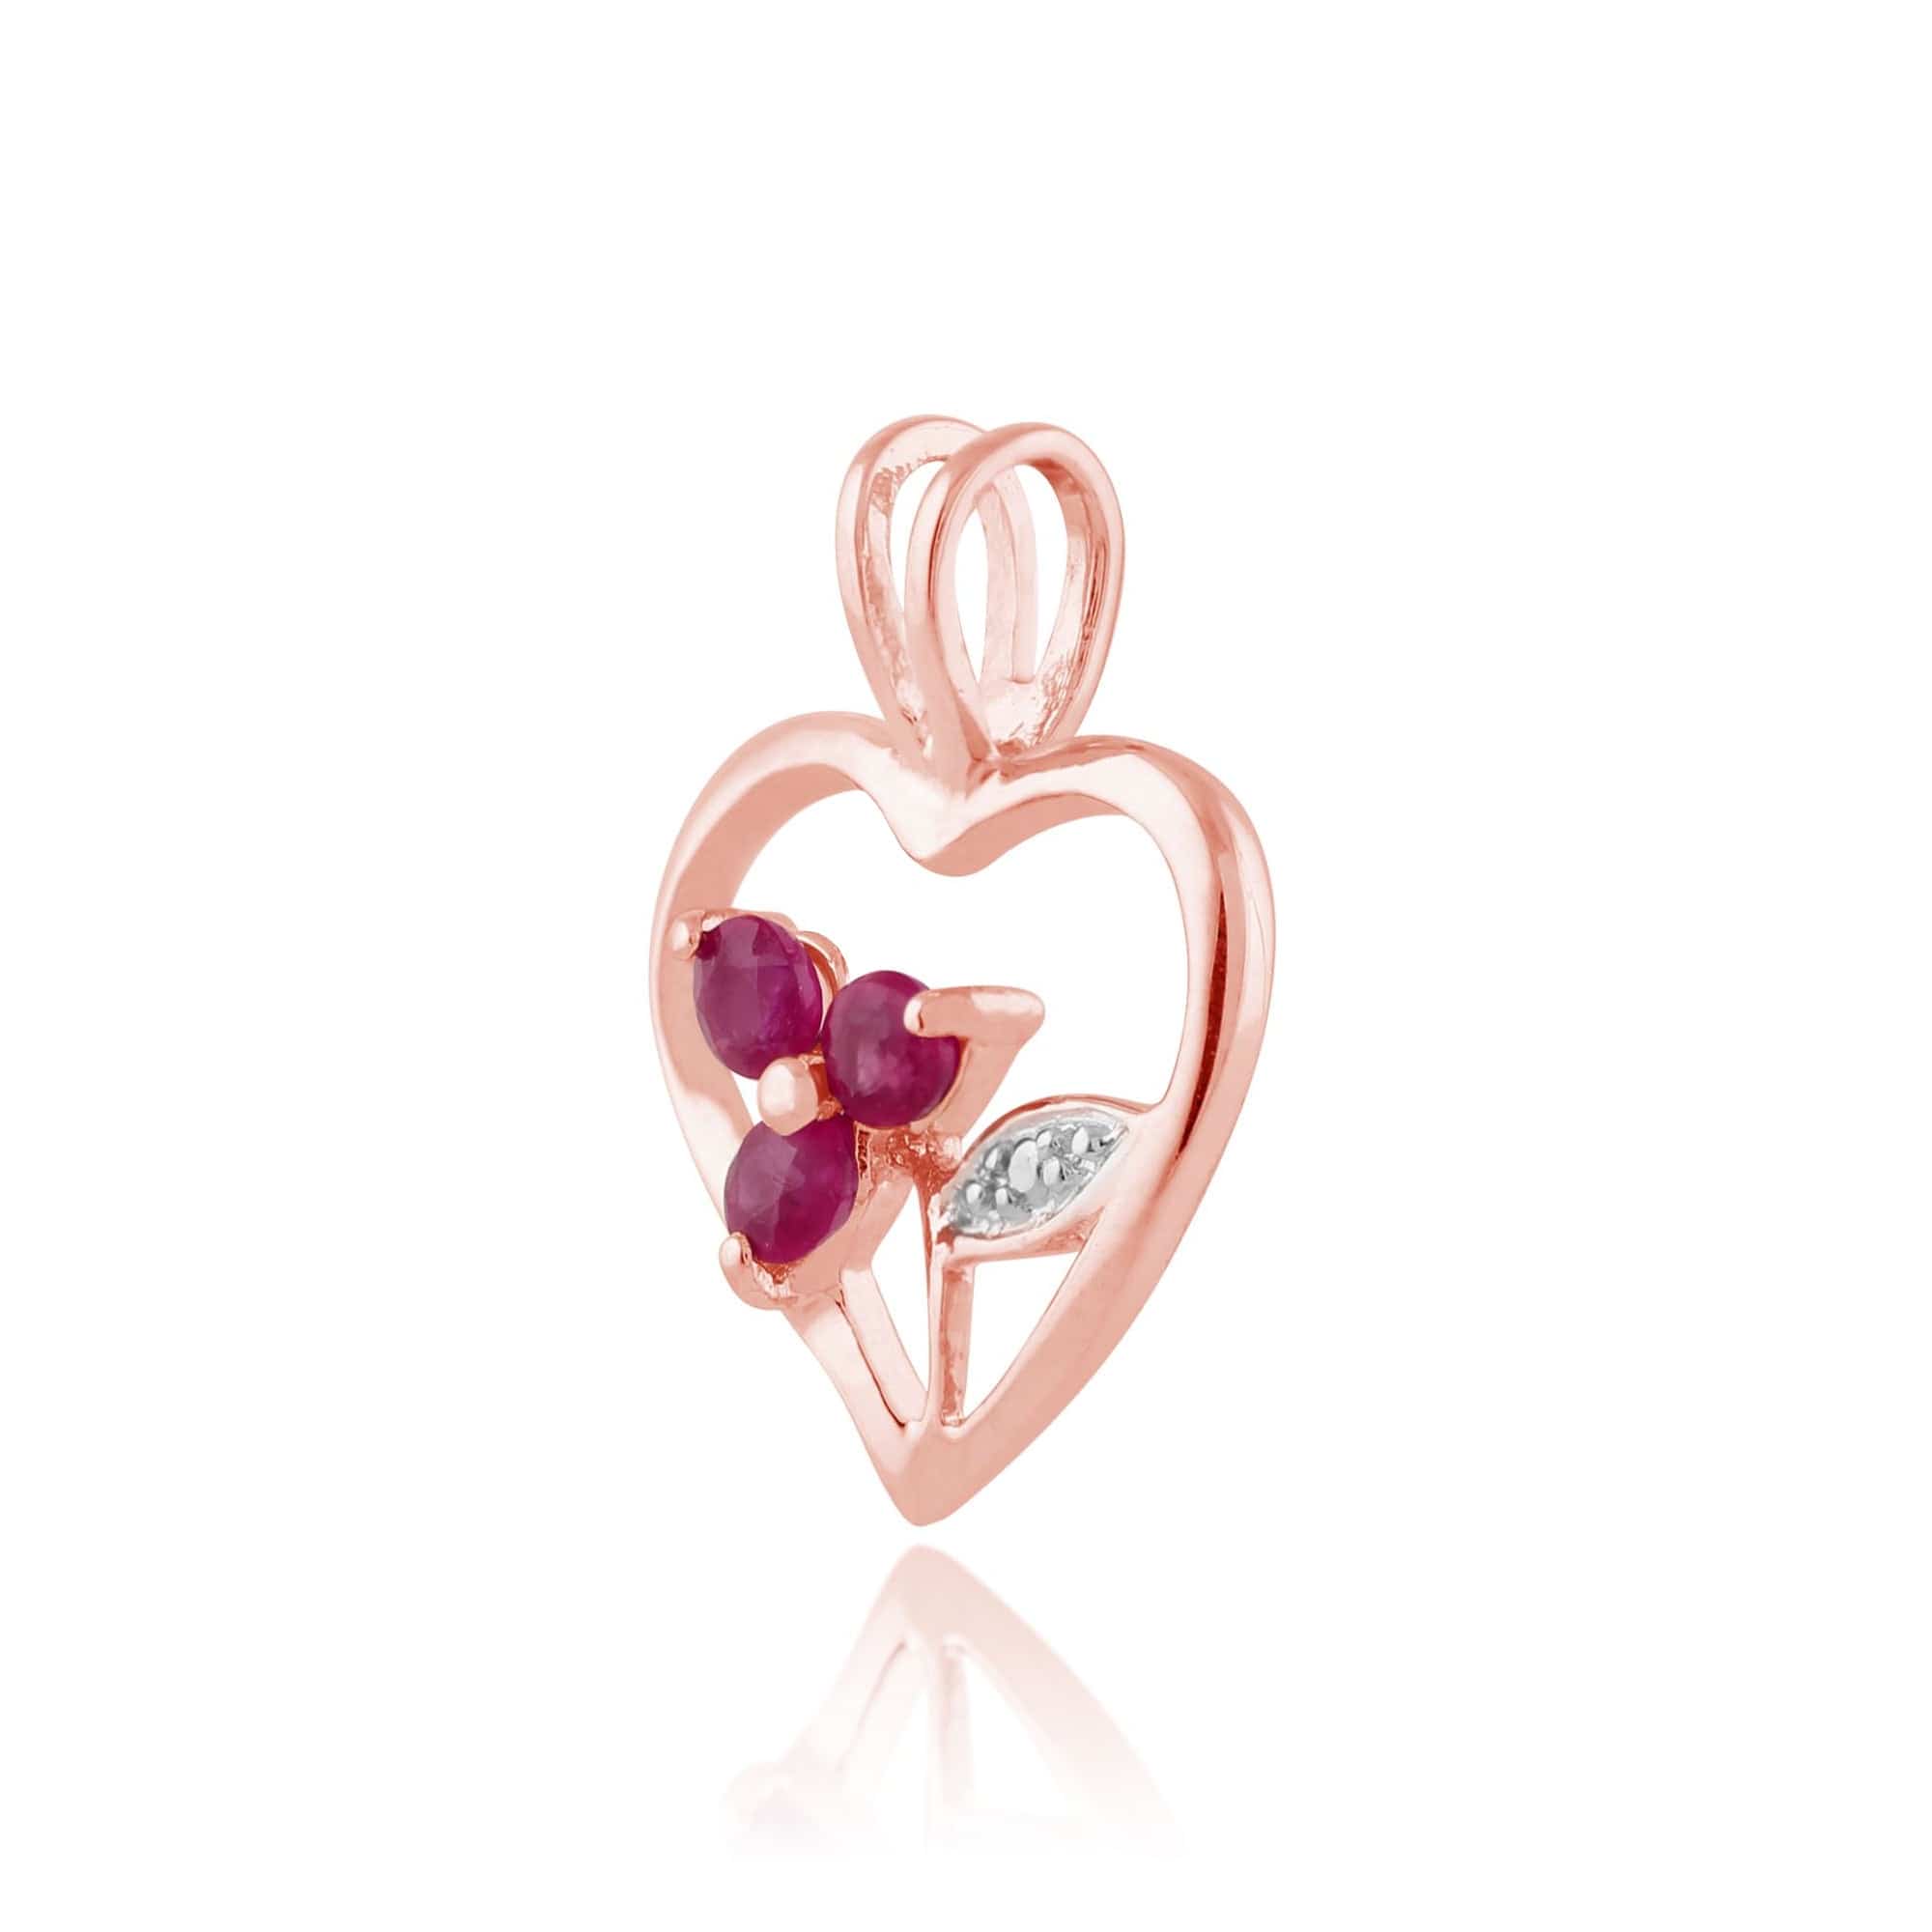 Floral Ruby Heart Pendant on Chain Image 2